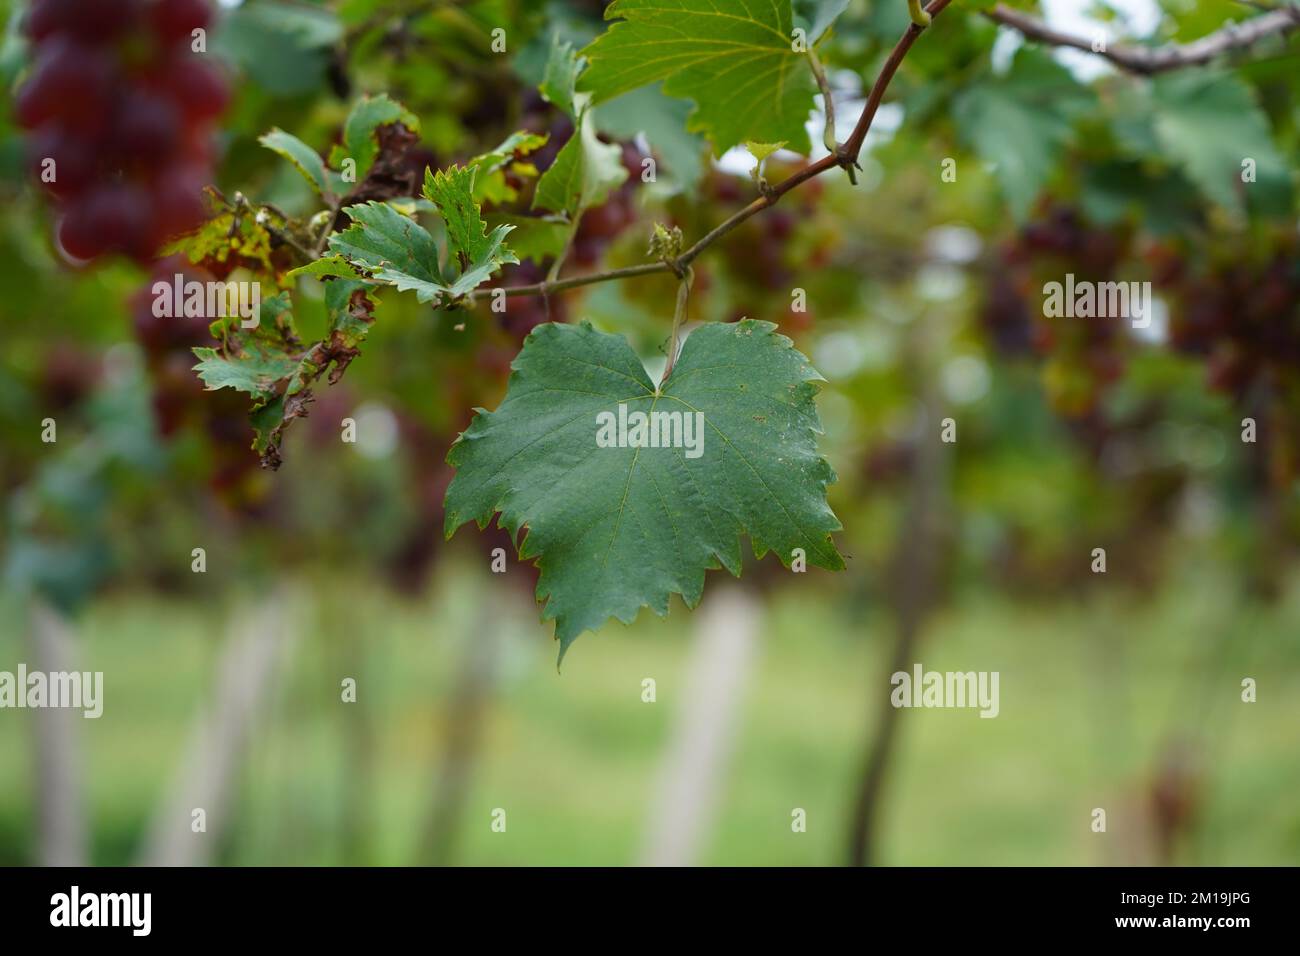 closeup picture of green leaf of a grape in a vineyard  Stock Photo